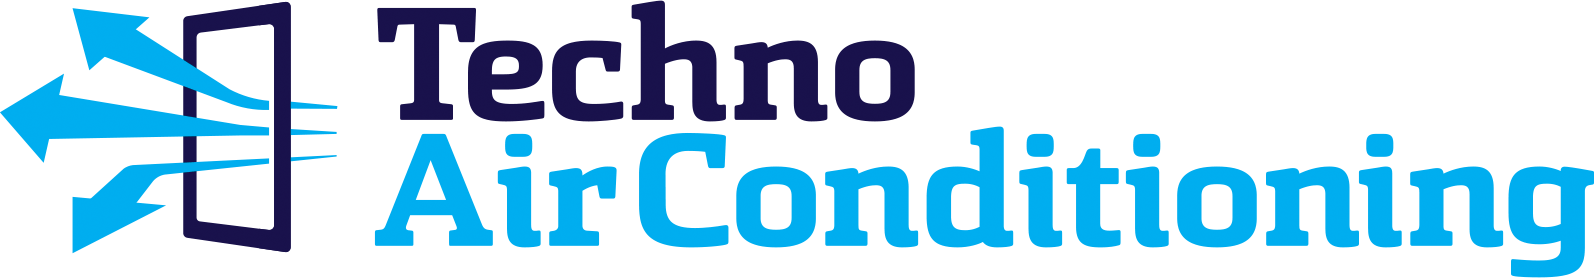 Techno Air Conditioning, Inc.